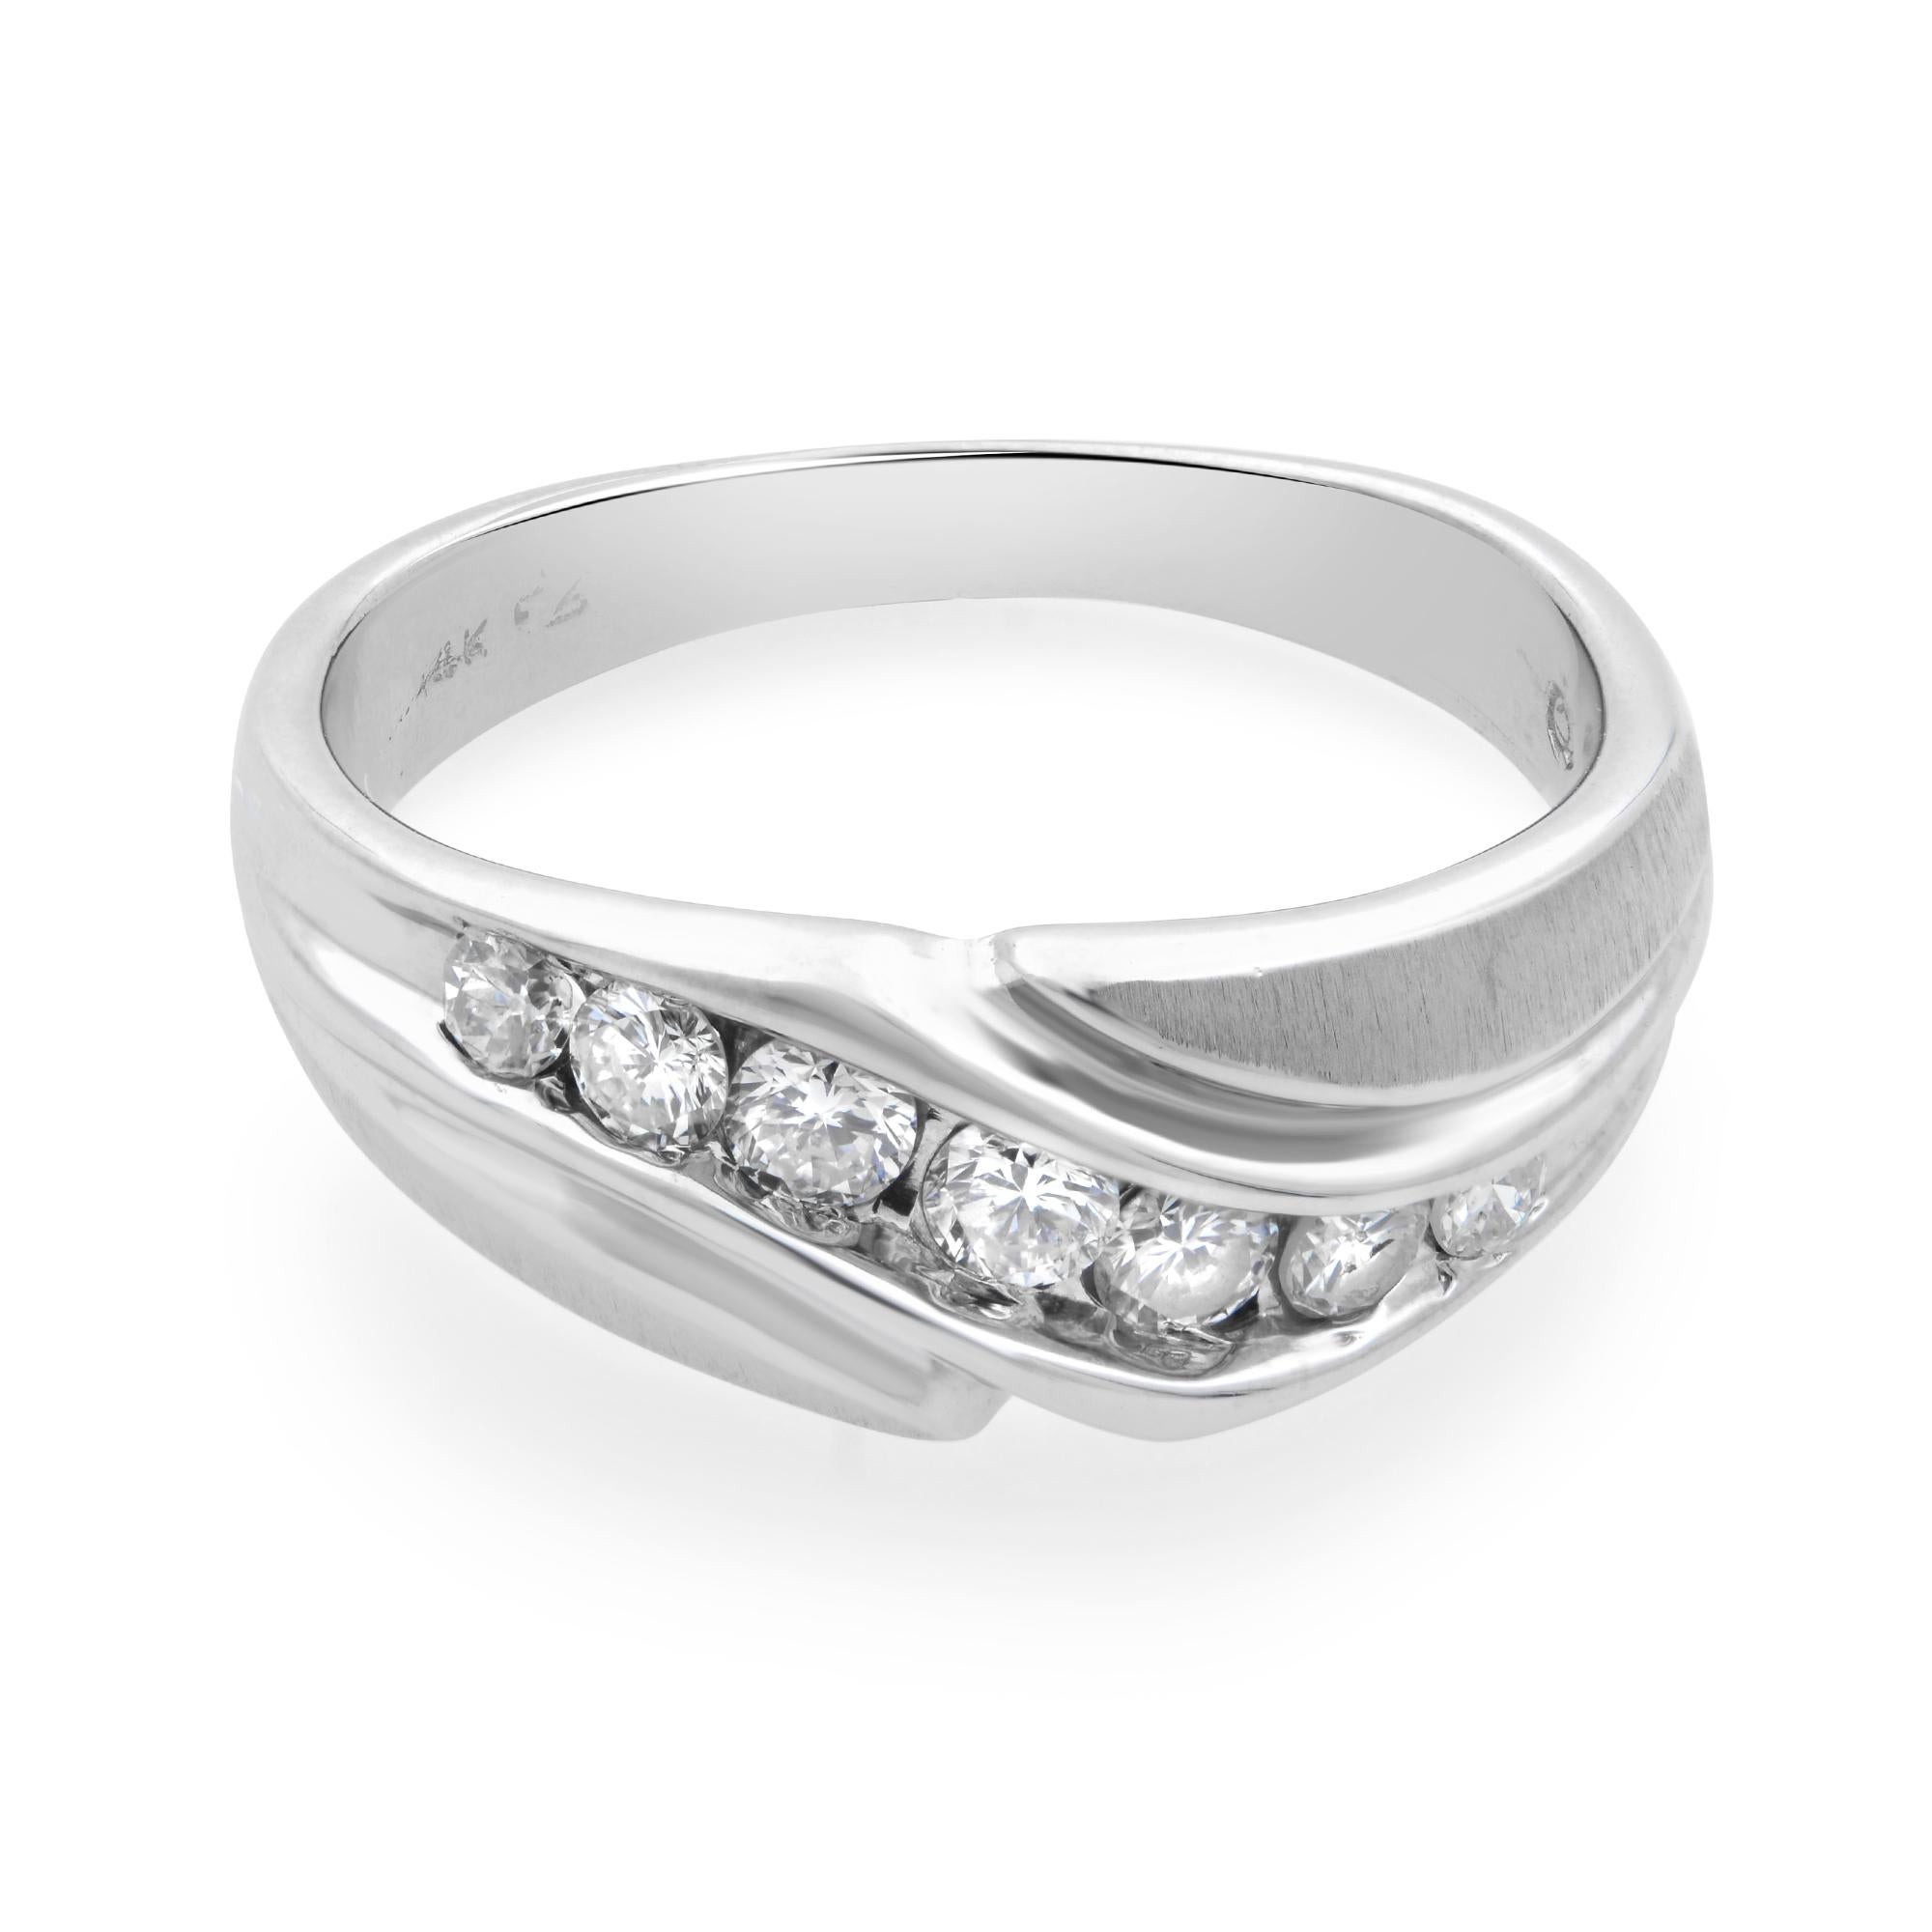 This diamond men's ring is crafted in 14k white gold. The ring features 7 channel set round cut diamonds weighing 0.50ct. Ring size: 9. Total weight: 7 gms. Comes with the manufacturer's box and booklet.